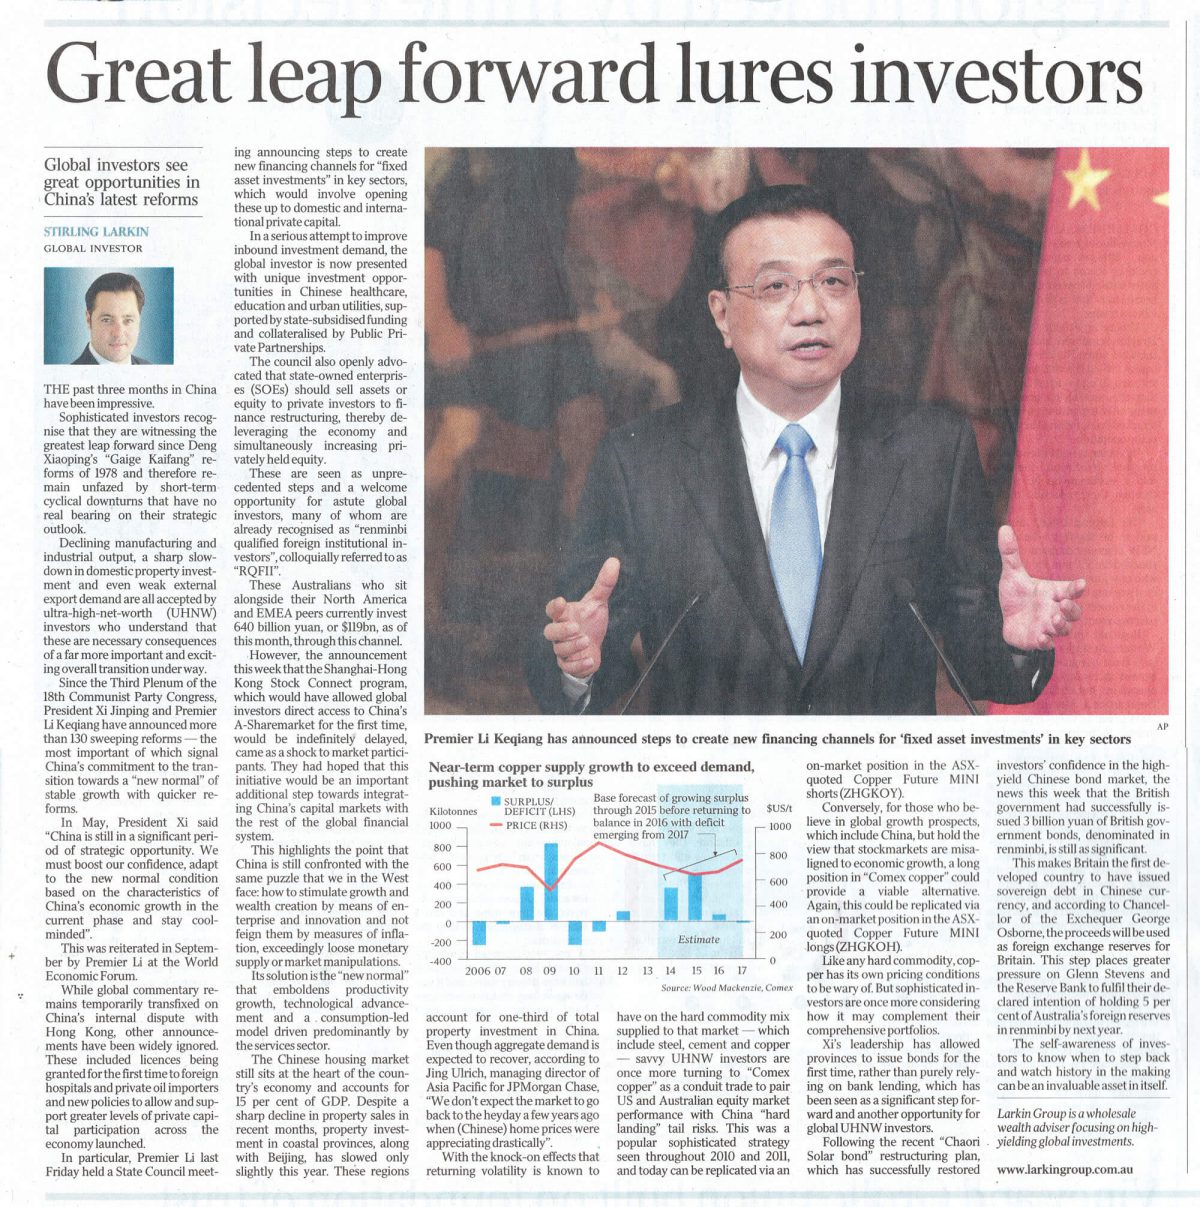 australian standfirst discusses investing in china in 2014 in the australian newspaper